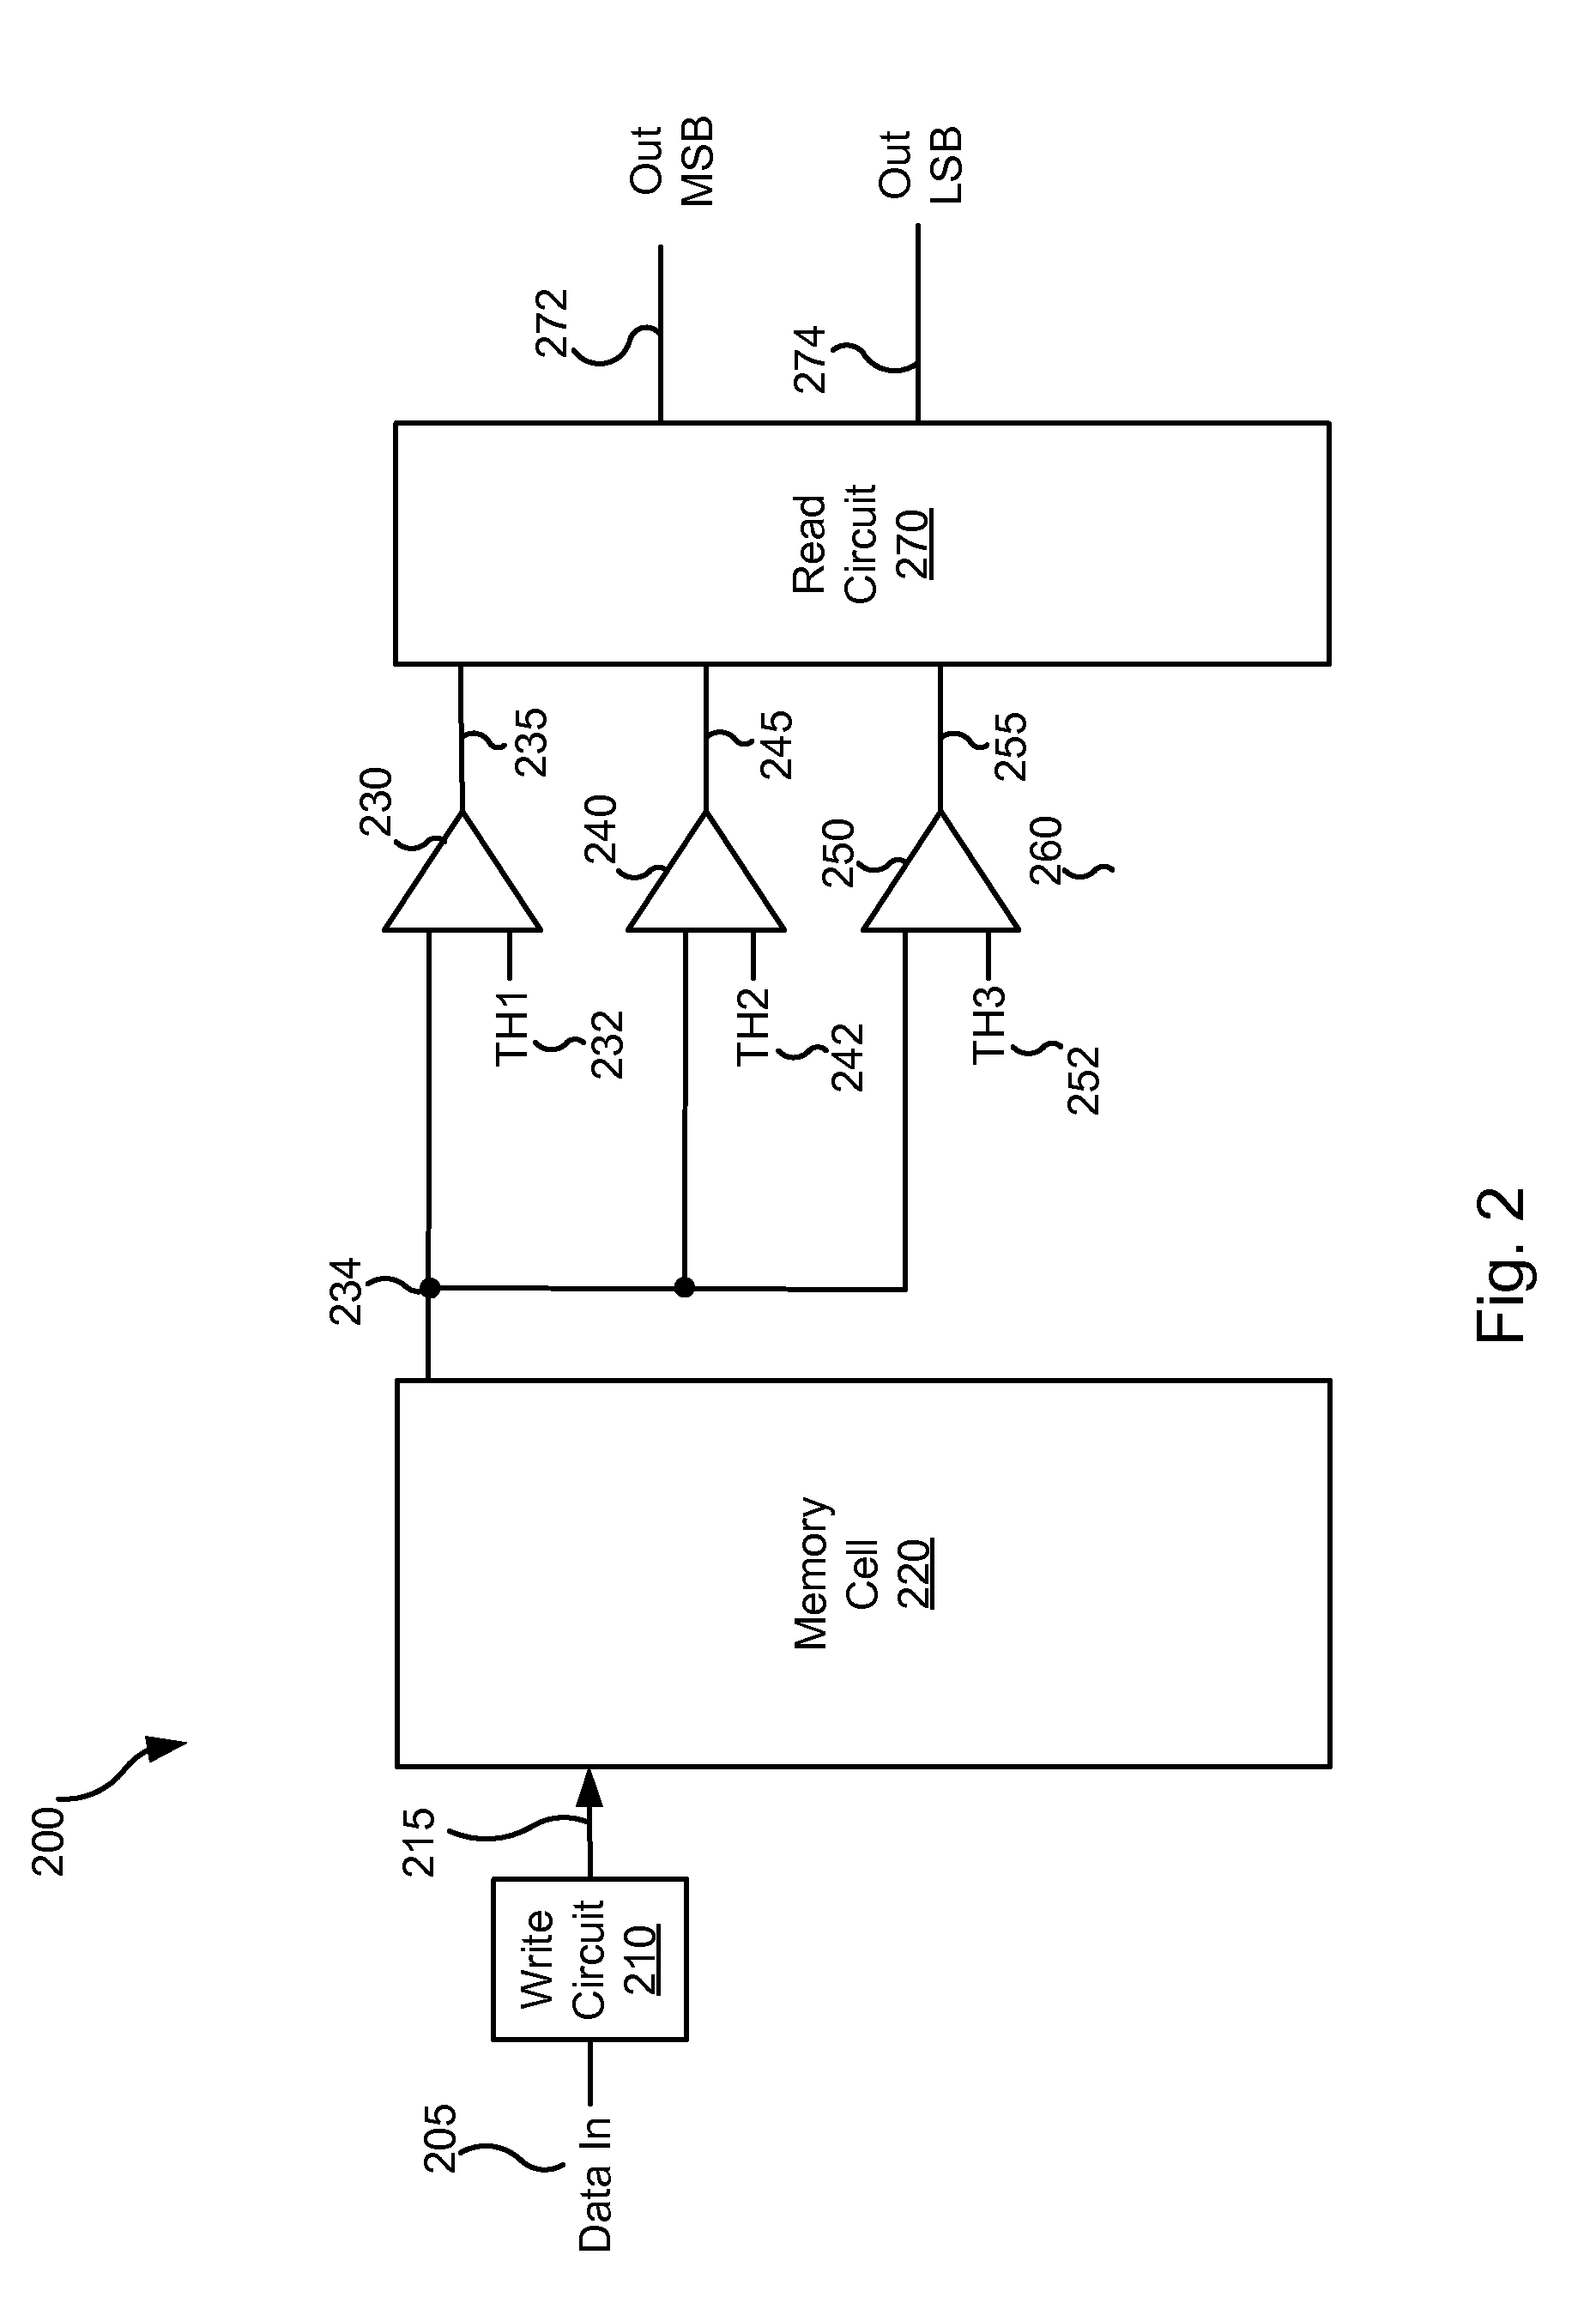 Systems and methods for extended life multi-bit memory cells